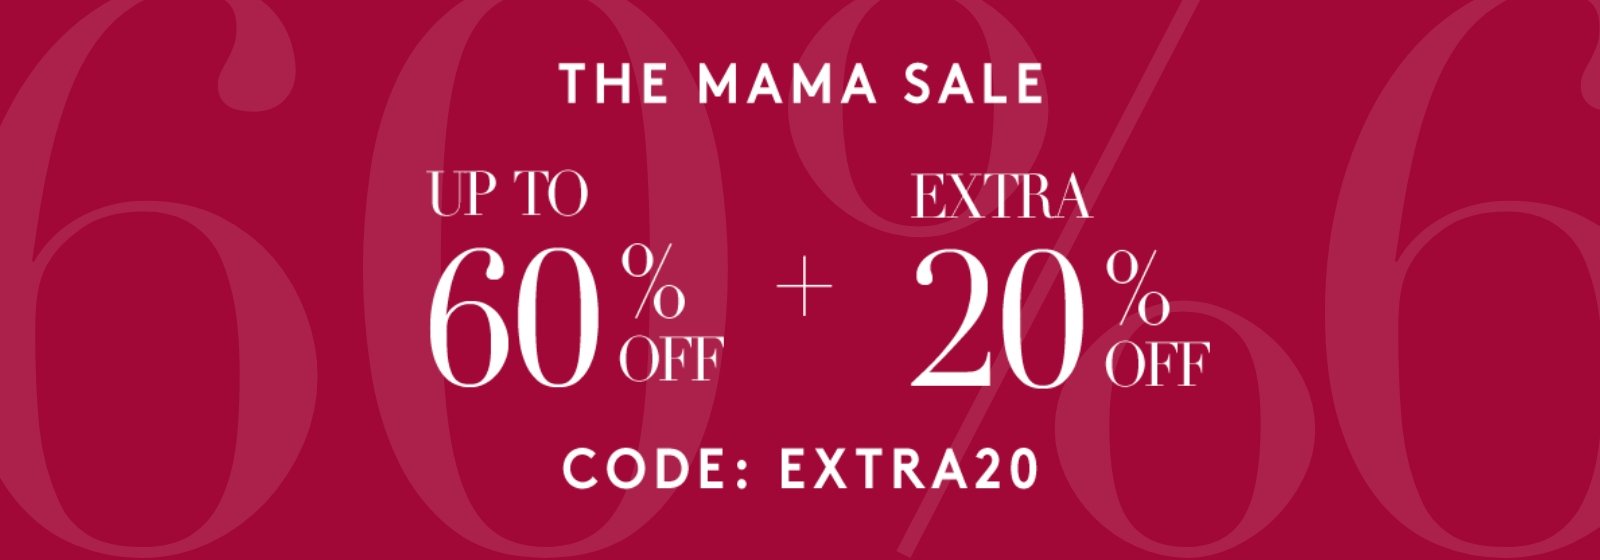 THE MAMA SALE | UP TO 60% OFF SELECTED LINES + NOW AN EXTRA 20% OFF WITH CODE: EXTRA20 